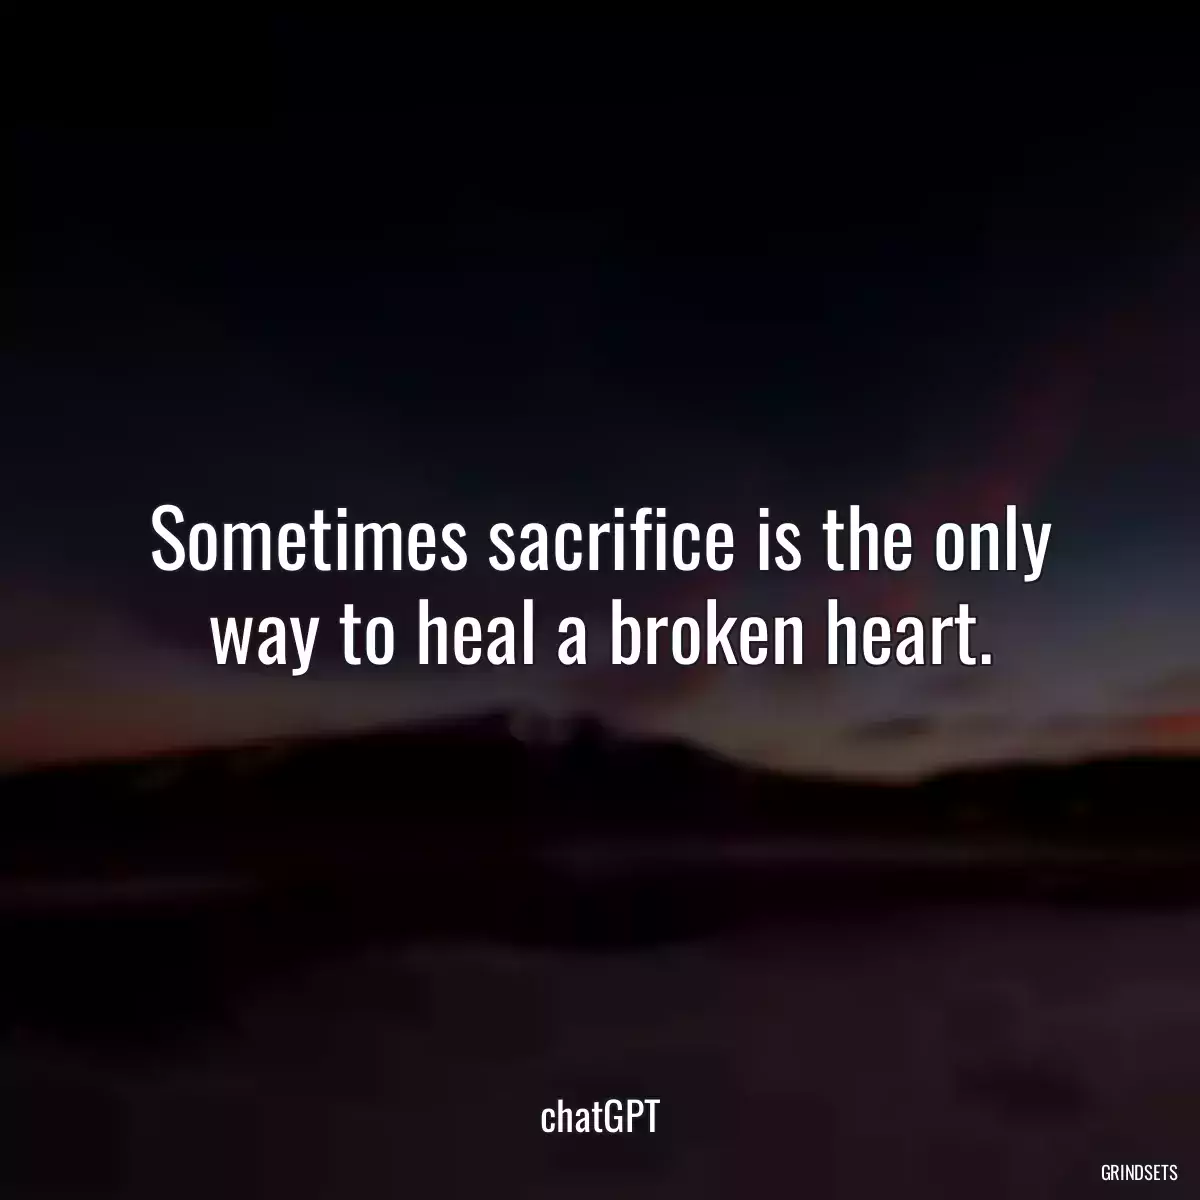 Sometimes sacrifice is the only way to heal a broken heart.